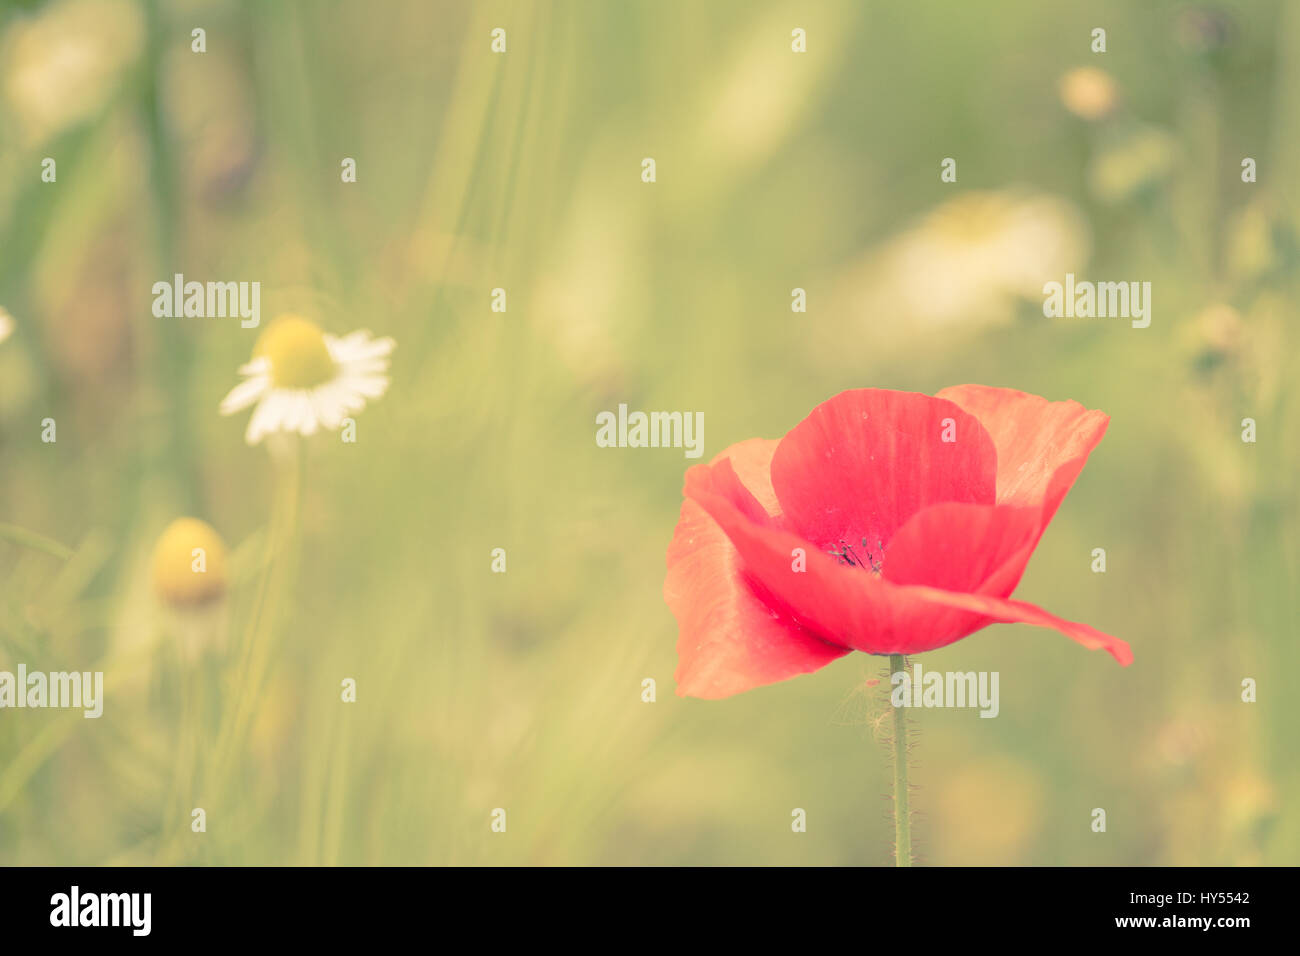 Poppies in a field Stock Photo